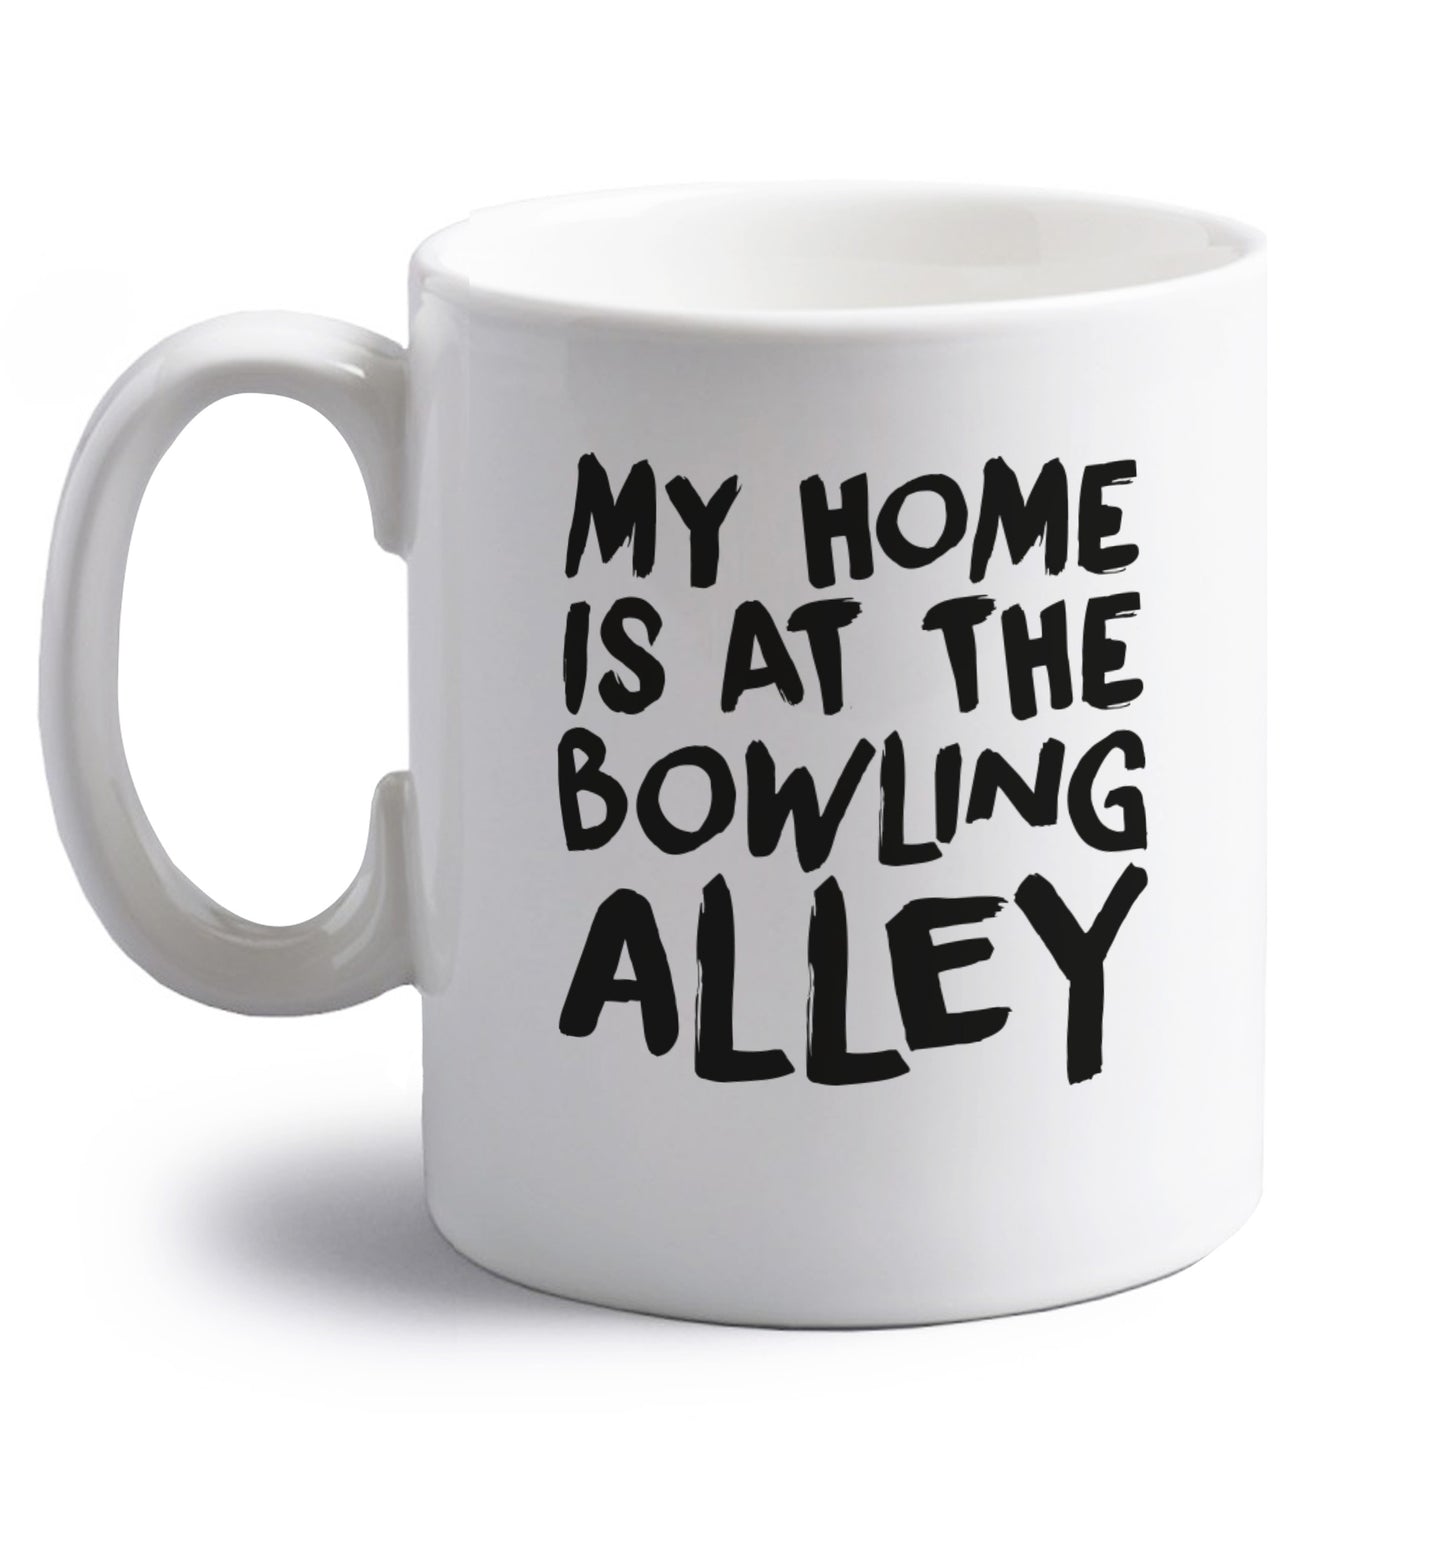 My home is at the bowling alley right handed white ceramic mug 